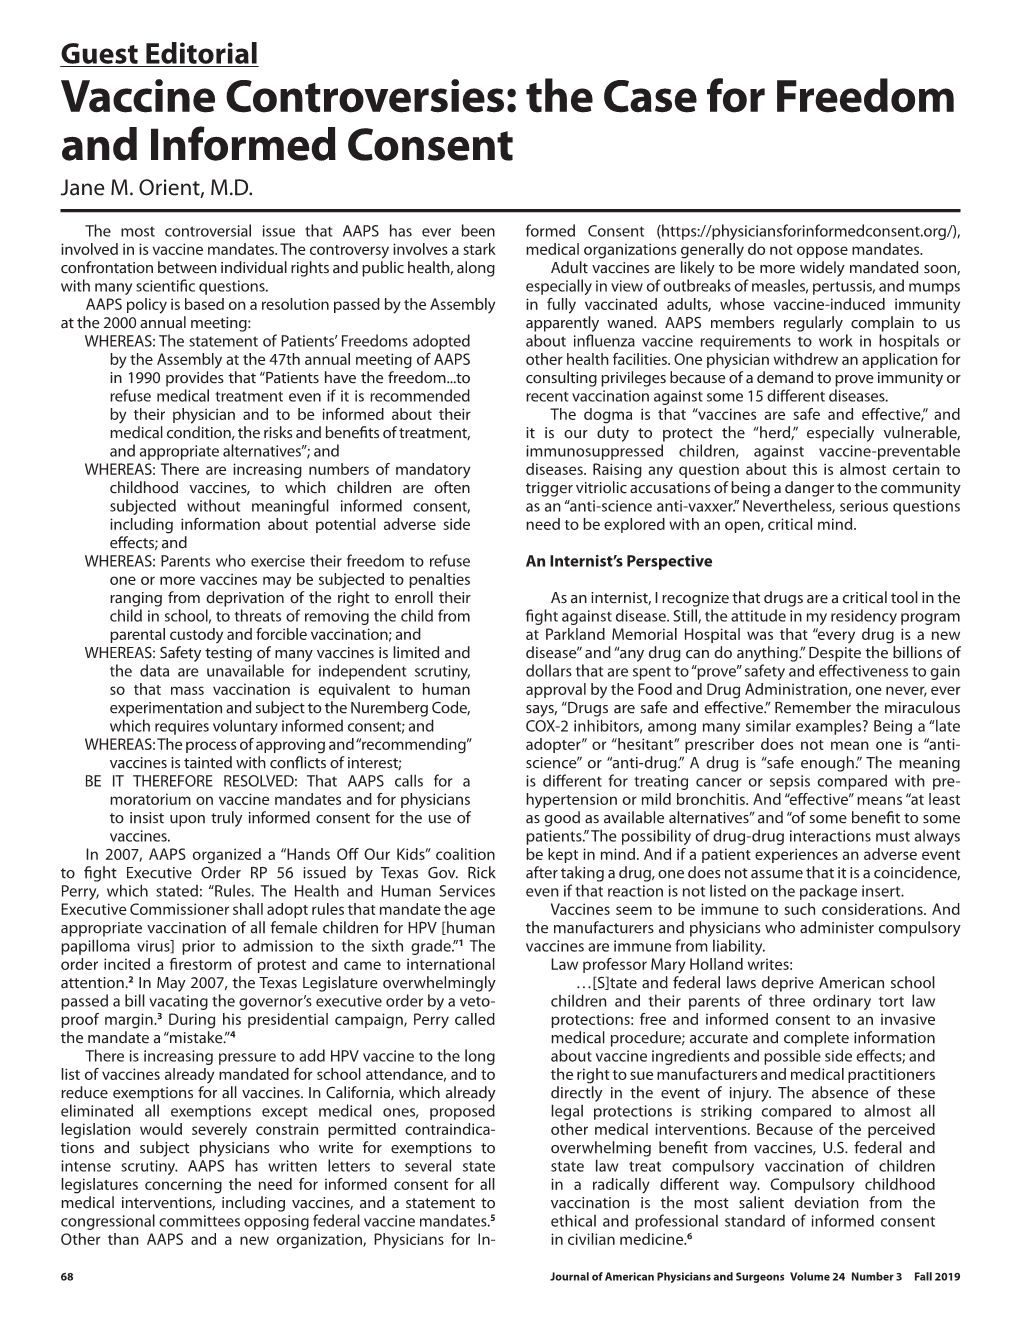 Vaccine Controversies: the Case for Freedom and Informed Consent Jane M